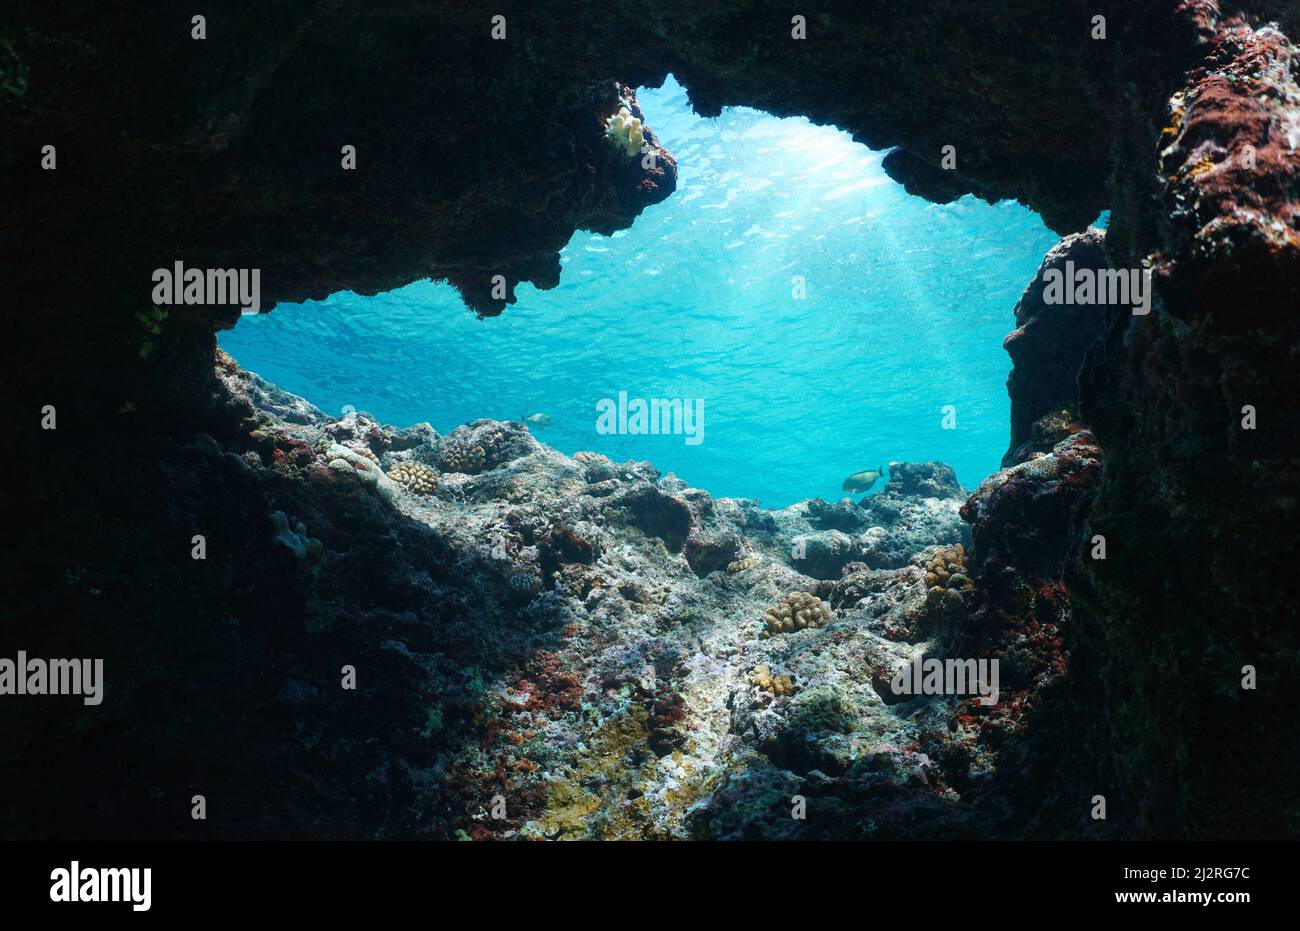 Underwater cave exit in the ocean with sunlight through water surface, south Pacific, Polynesia Stock Photo